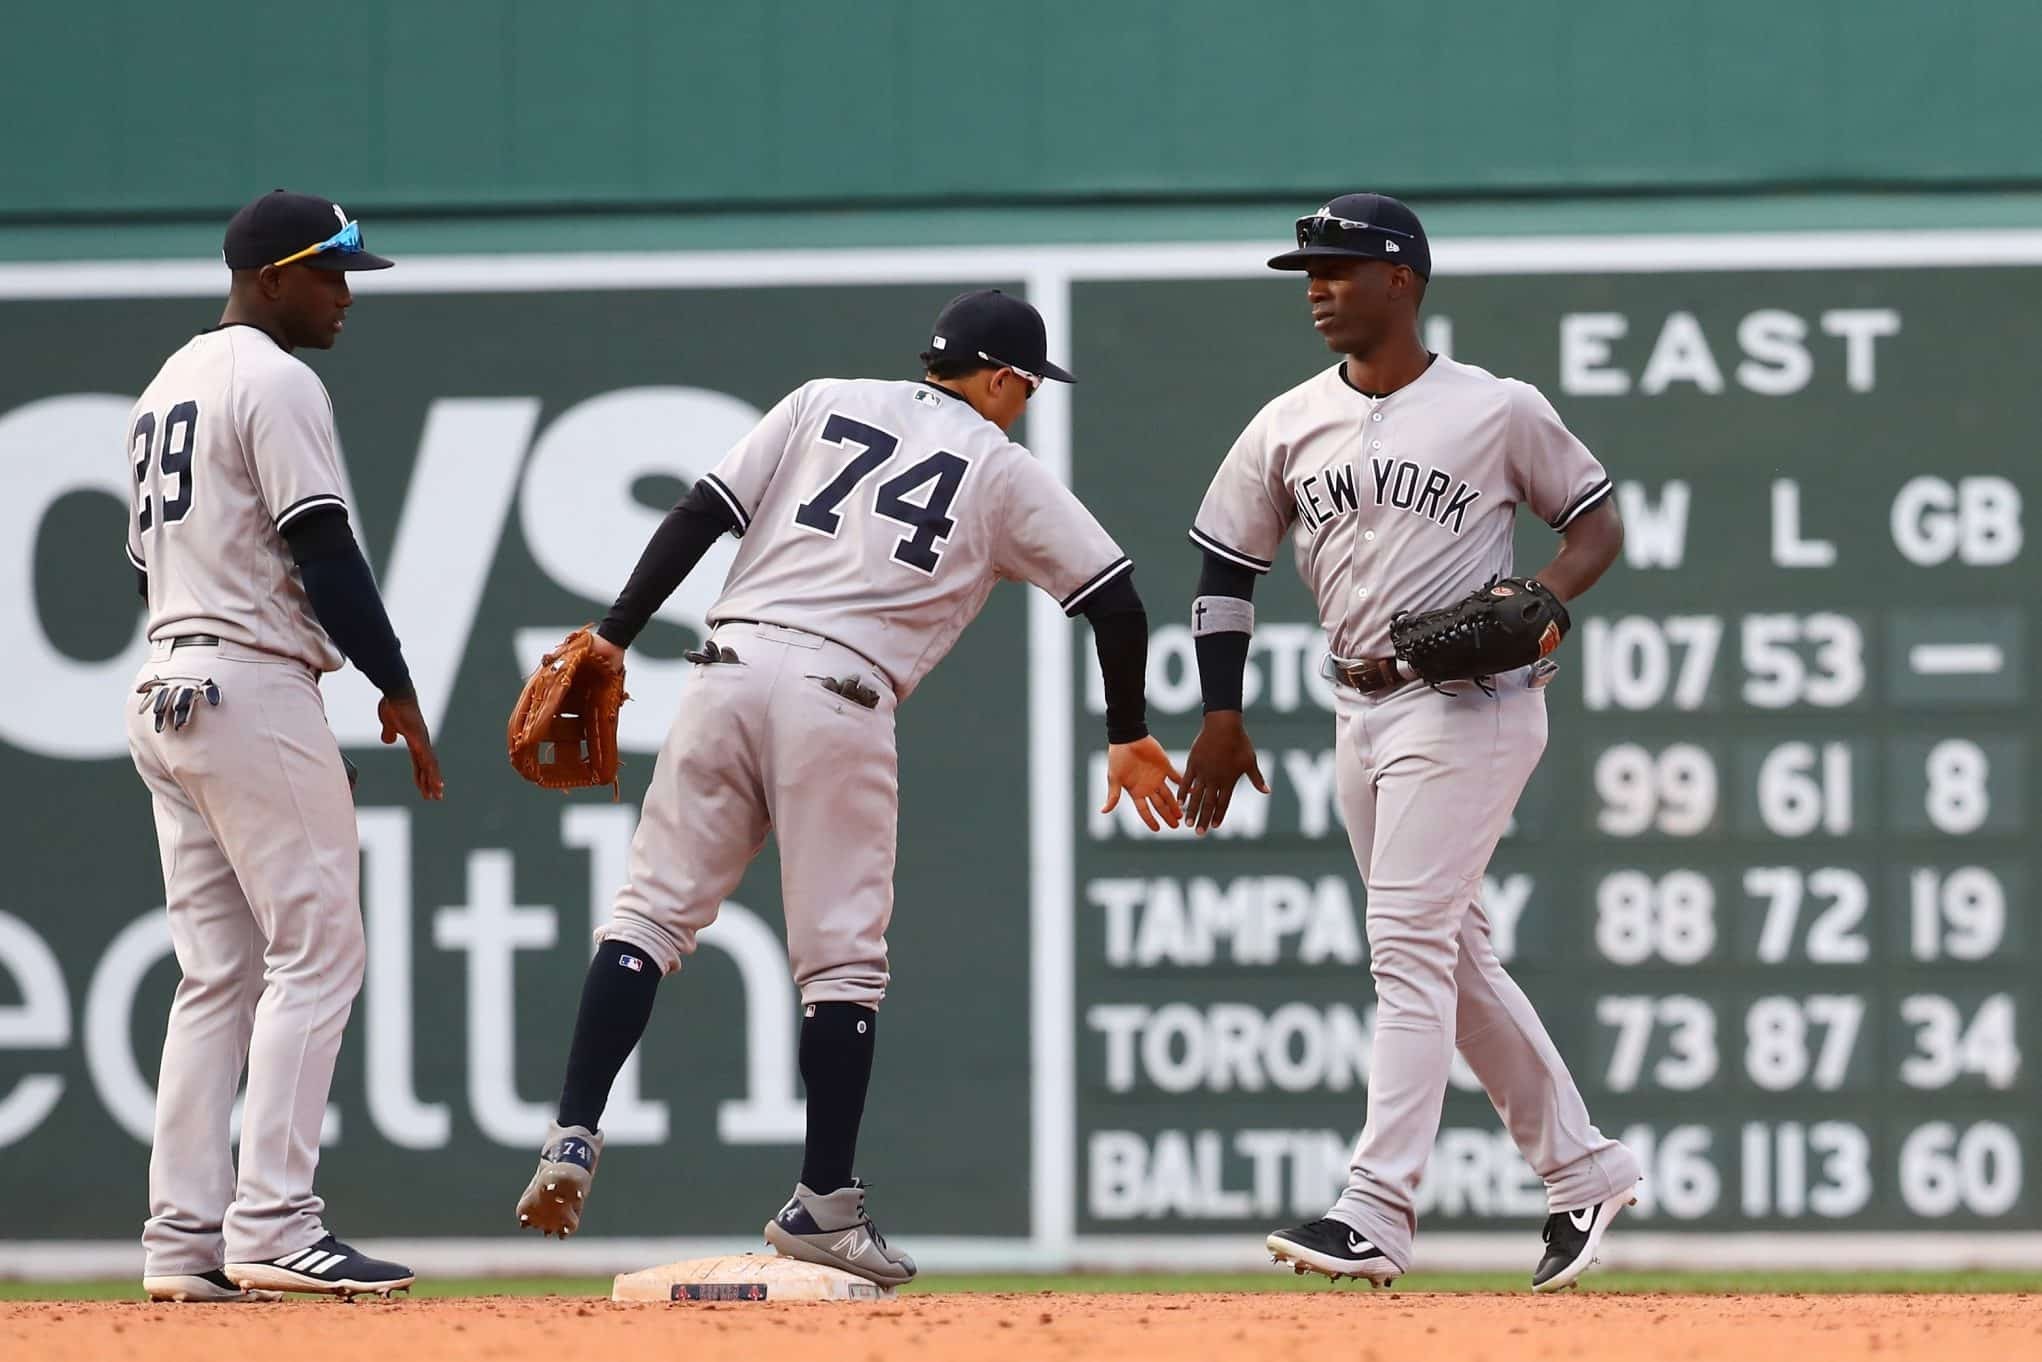 This final series means more than most realize for the New York Yankees